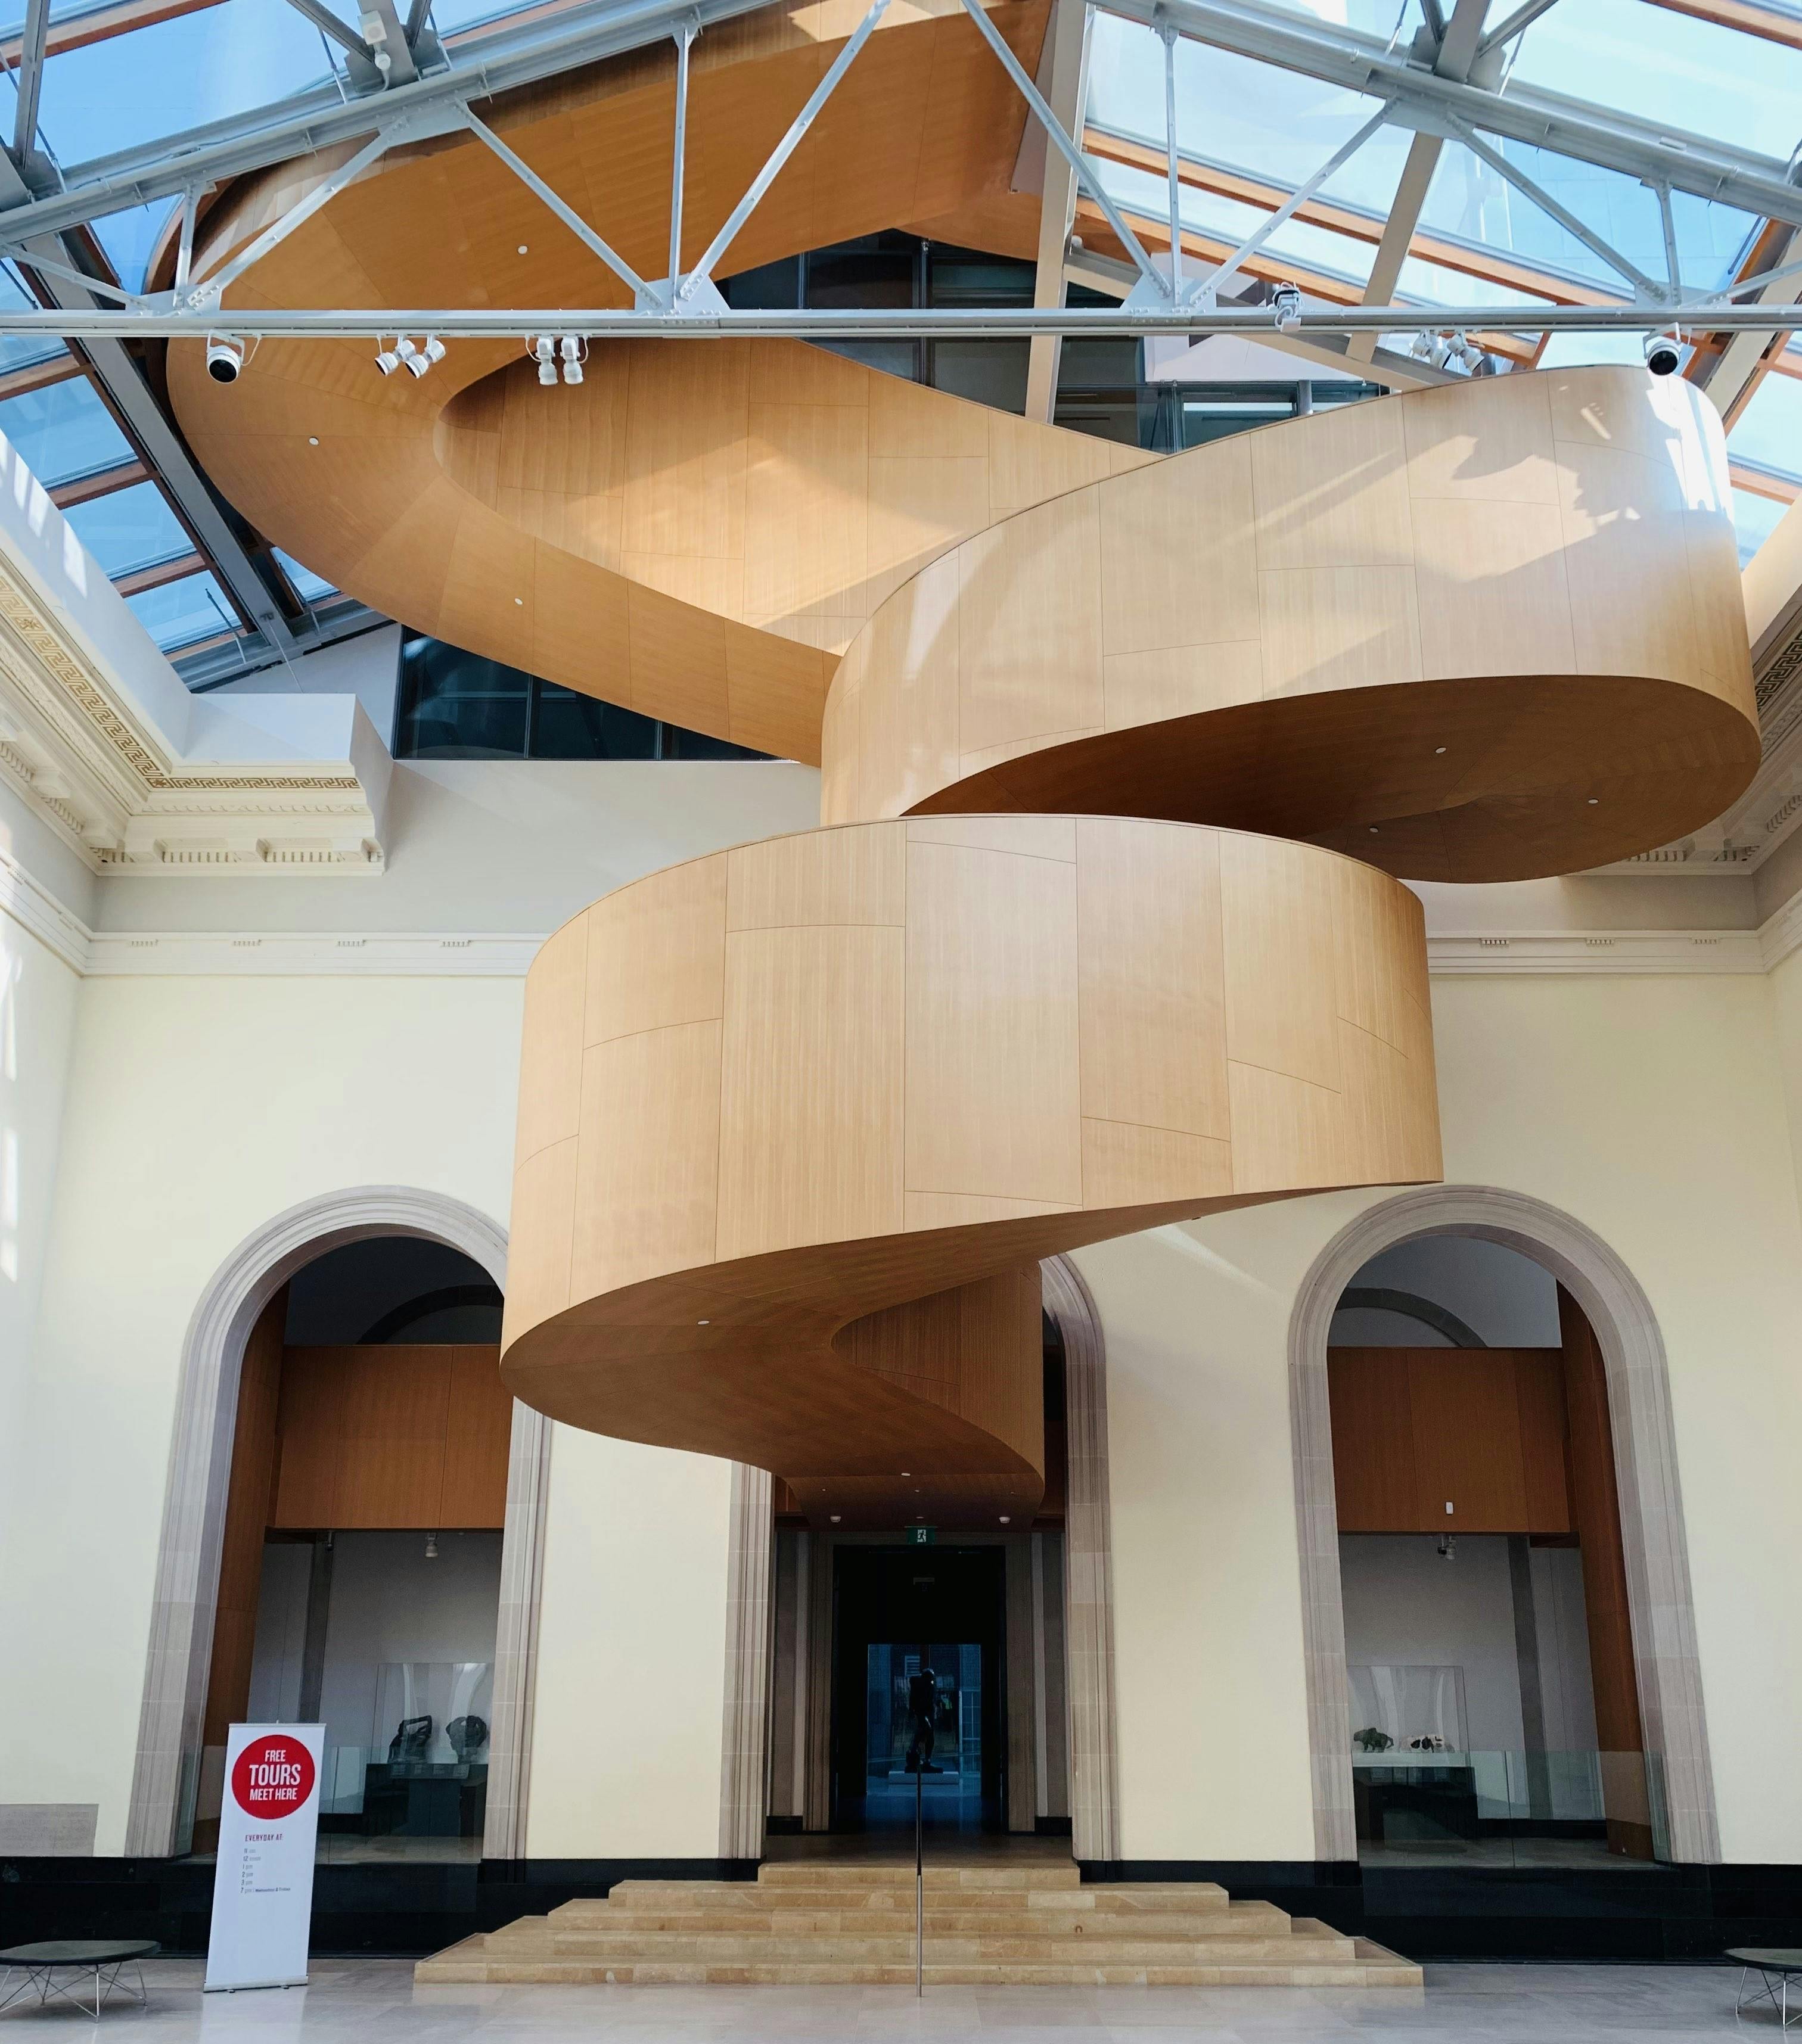 AGO's iconic Frank Gehry-designed spiral staircase